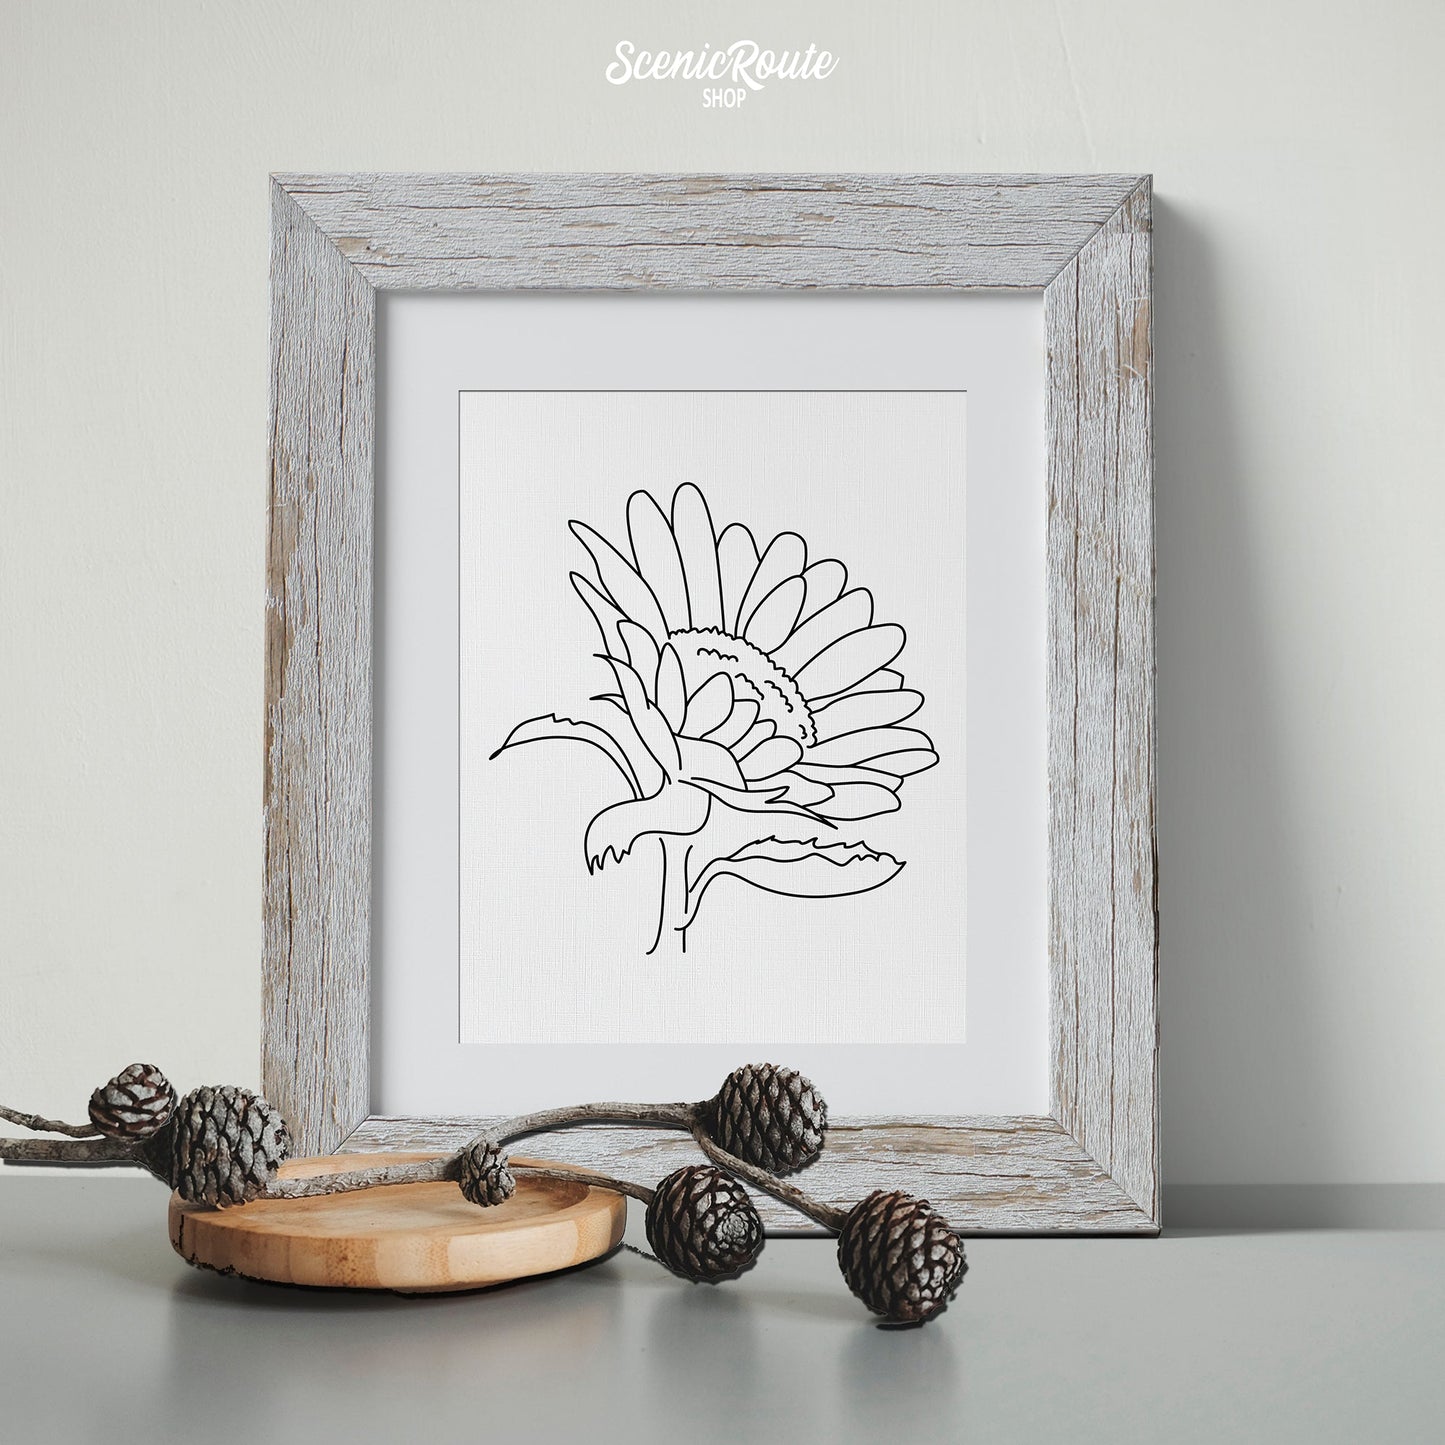 A framed line art drawing of a Sunflower Flower on a table with pinecones